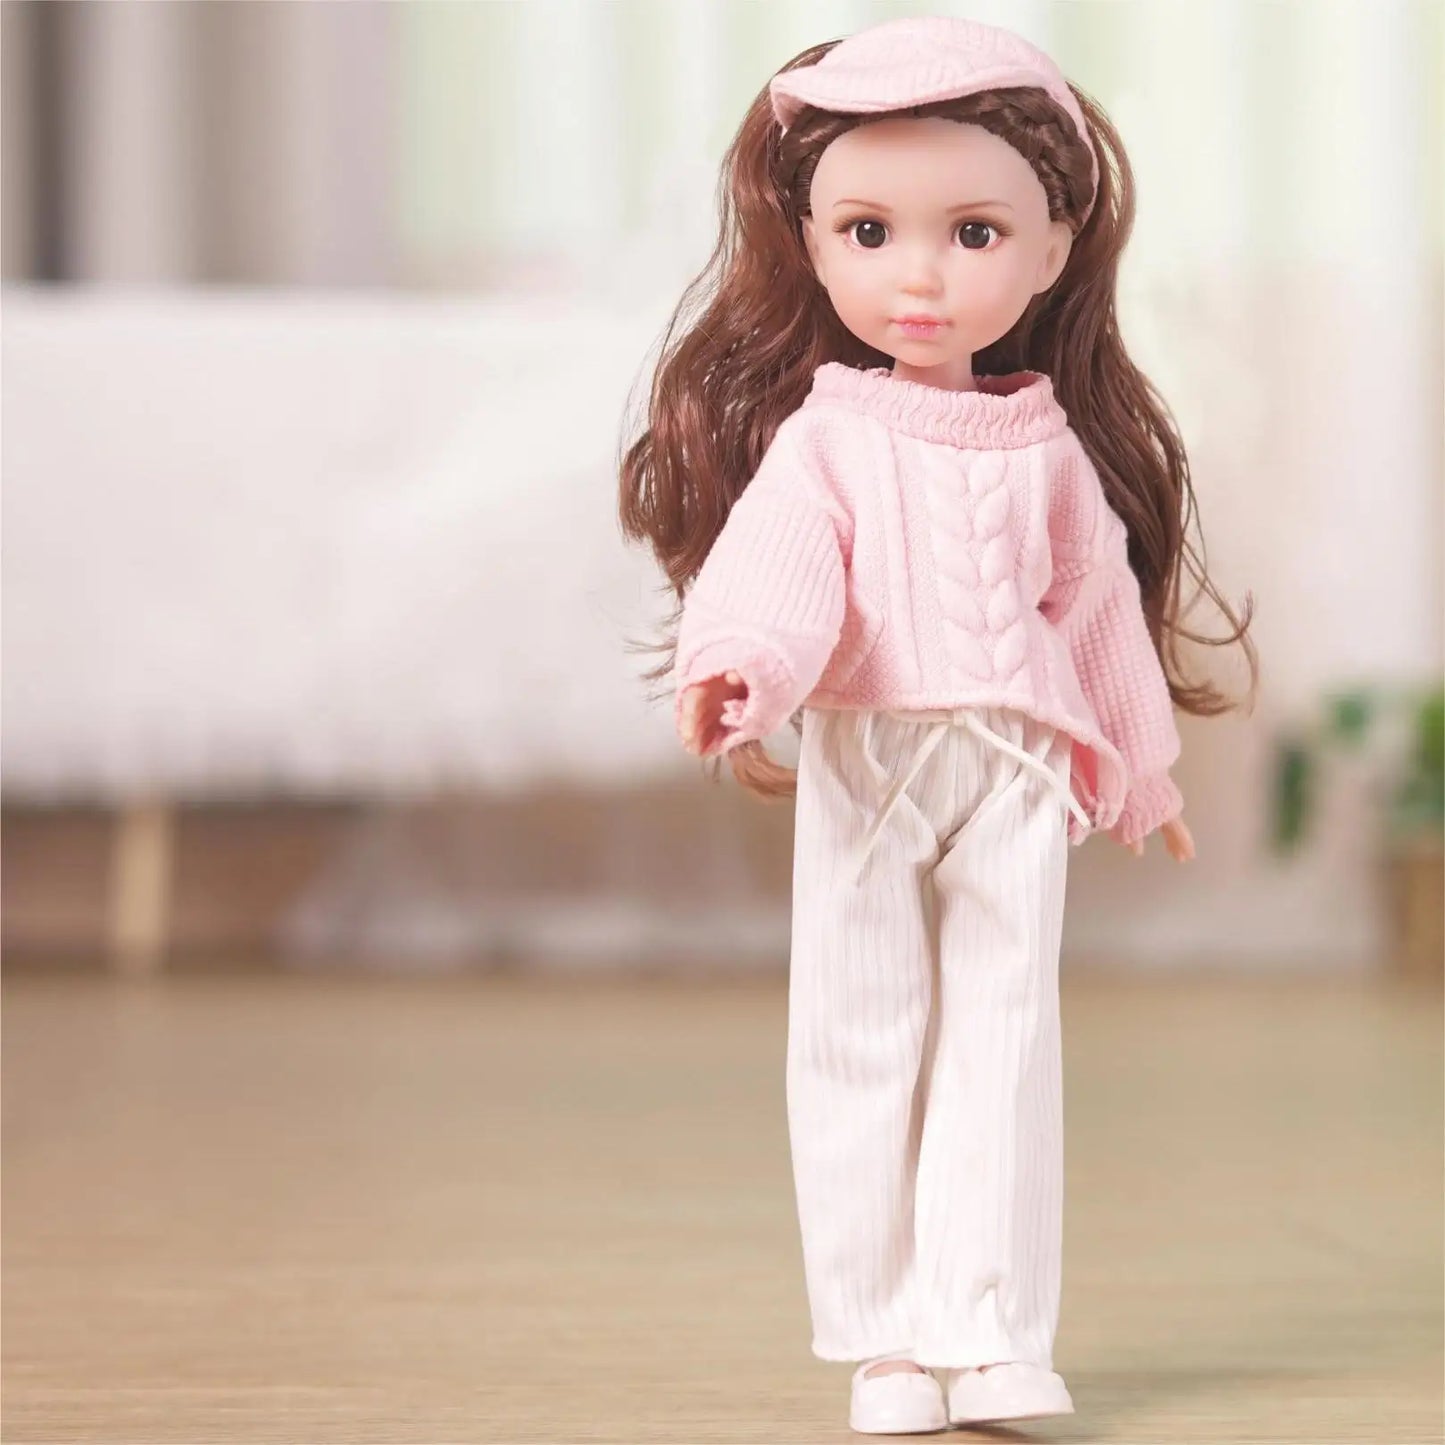 Girl's Full Vinyl Princess Doll with Clothes, 14 Inch Cute Madeup Doll - Annie Potter's Yarn Basket